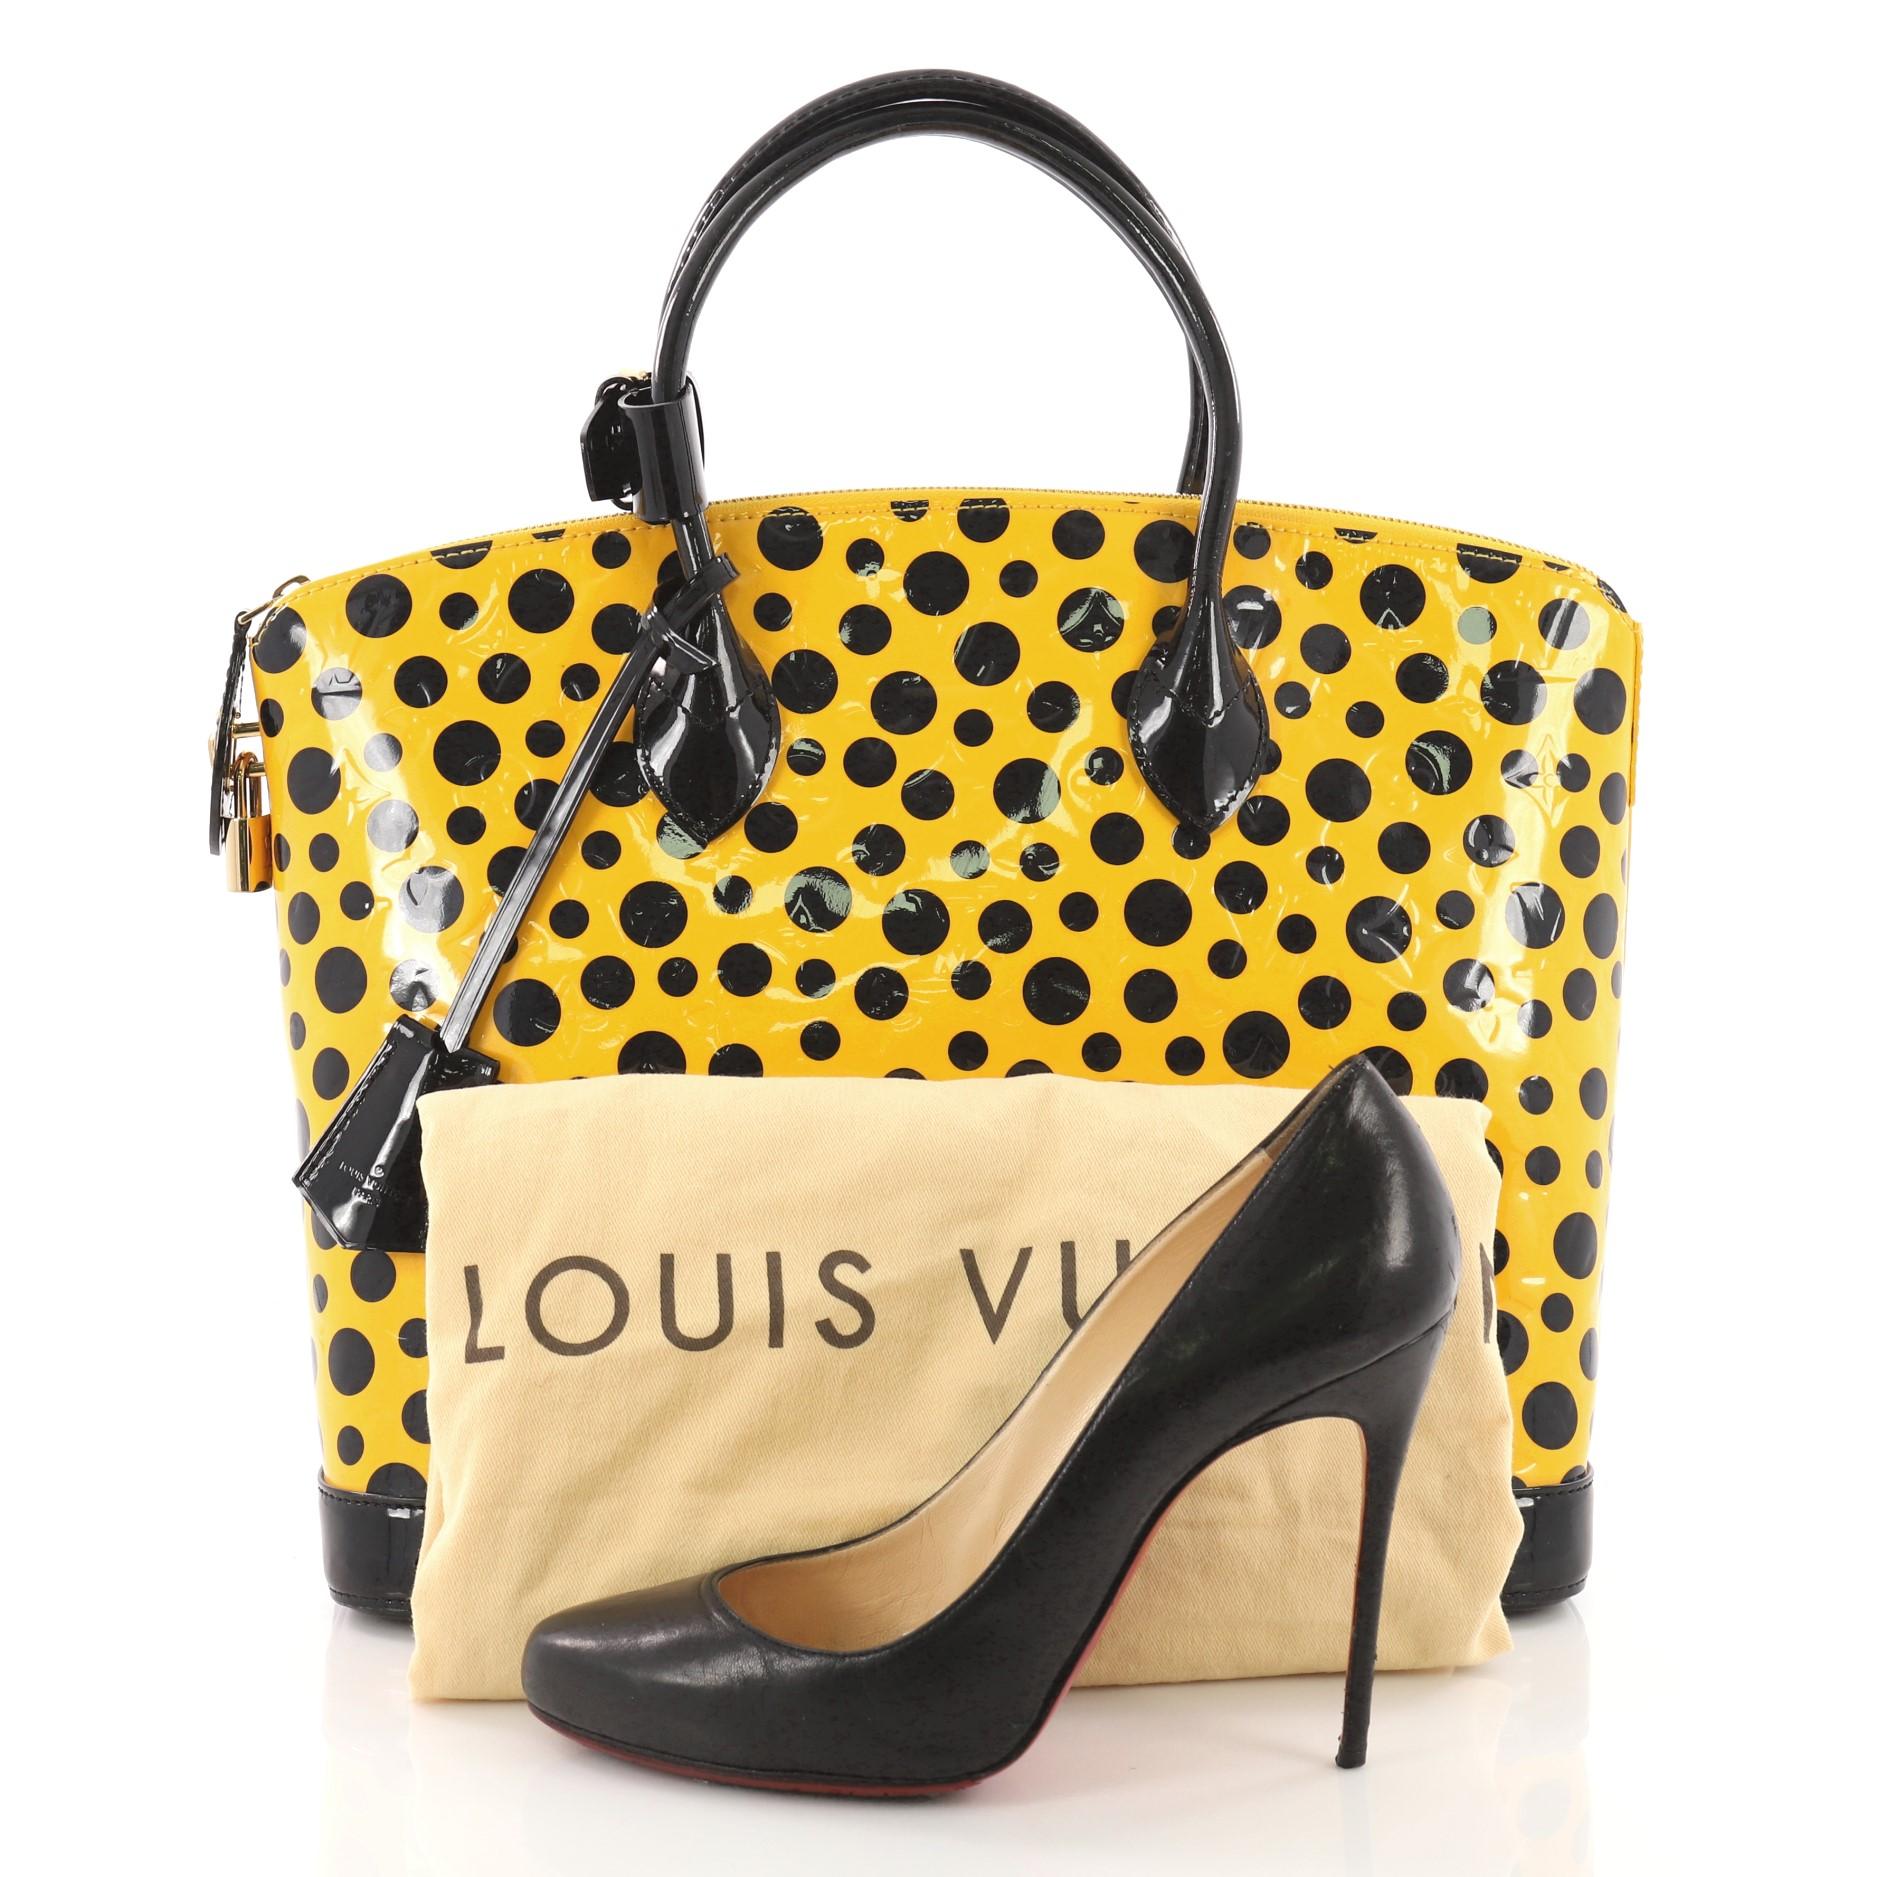 This Louis Vuitton Lockit Handbag Monogram Vernis Kusama Infinity Dots MM, crafted from yellow printed monogram vernis leather,  features dual rolled leather handles, black patent leather trims, and gold-tone hardware accents. Its zip closure opens